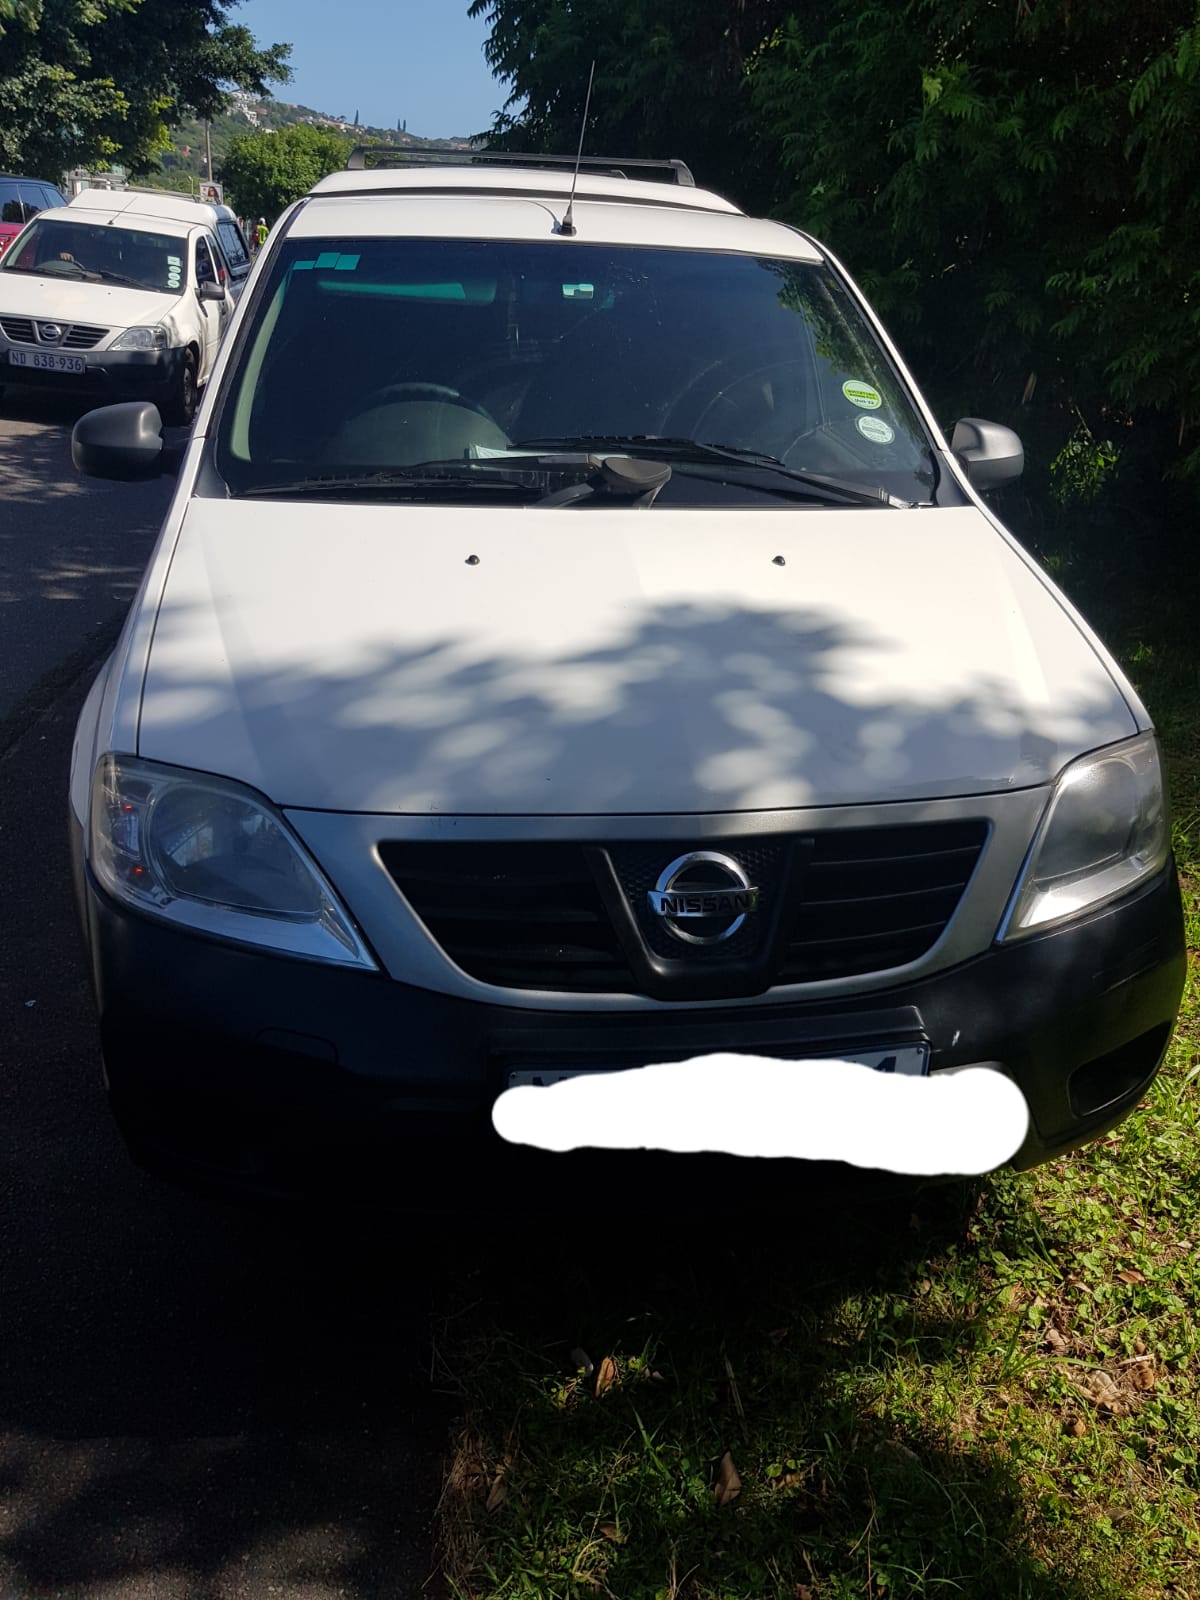 Stolen vehicle recovered by Fidelity Services Group